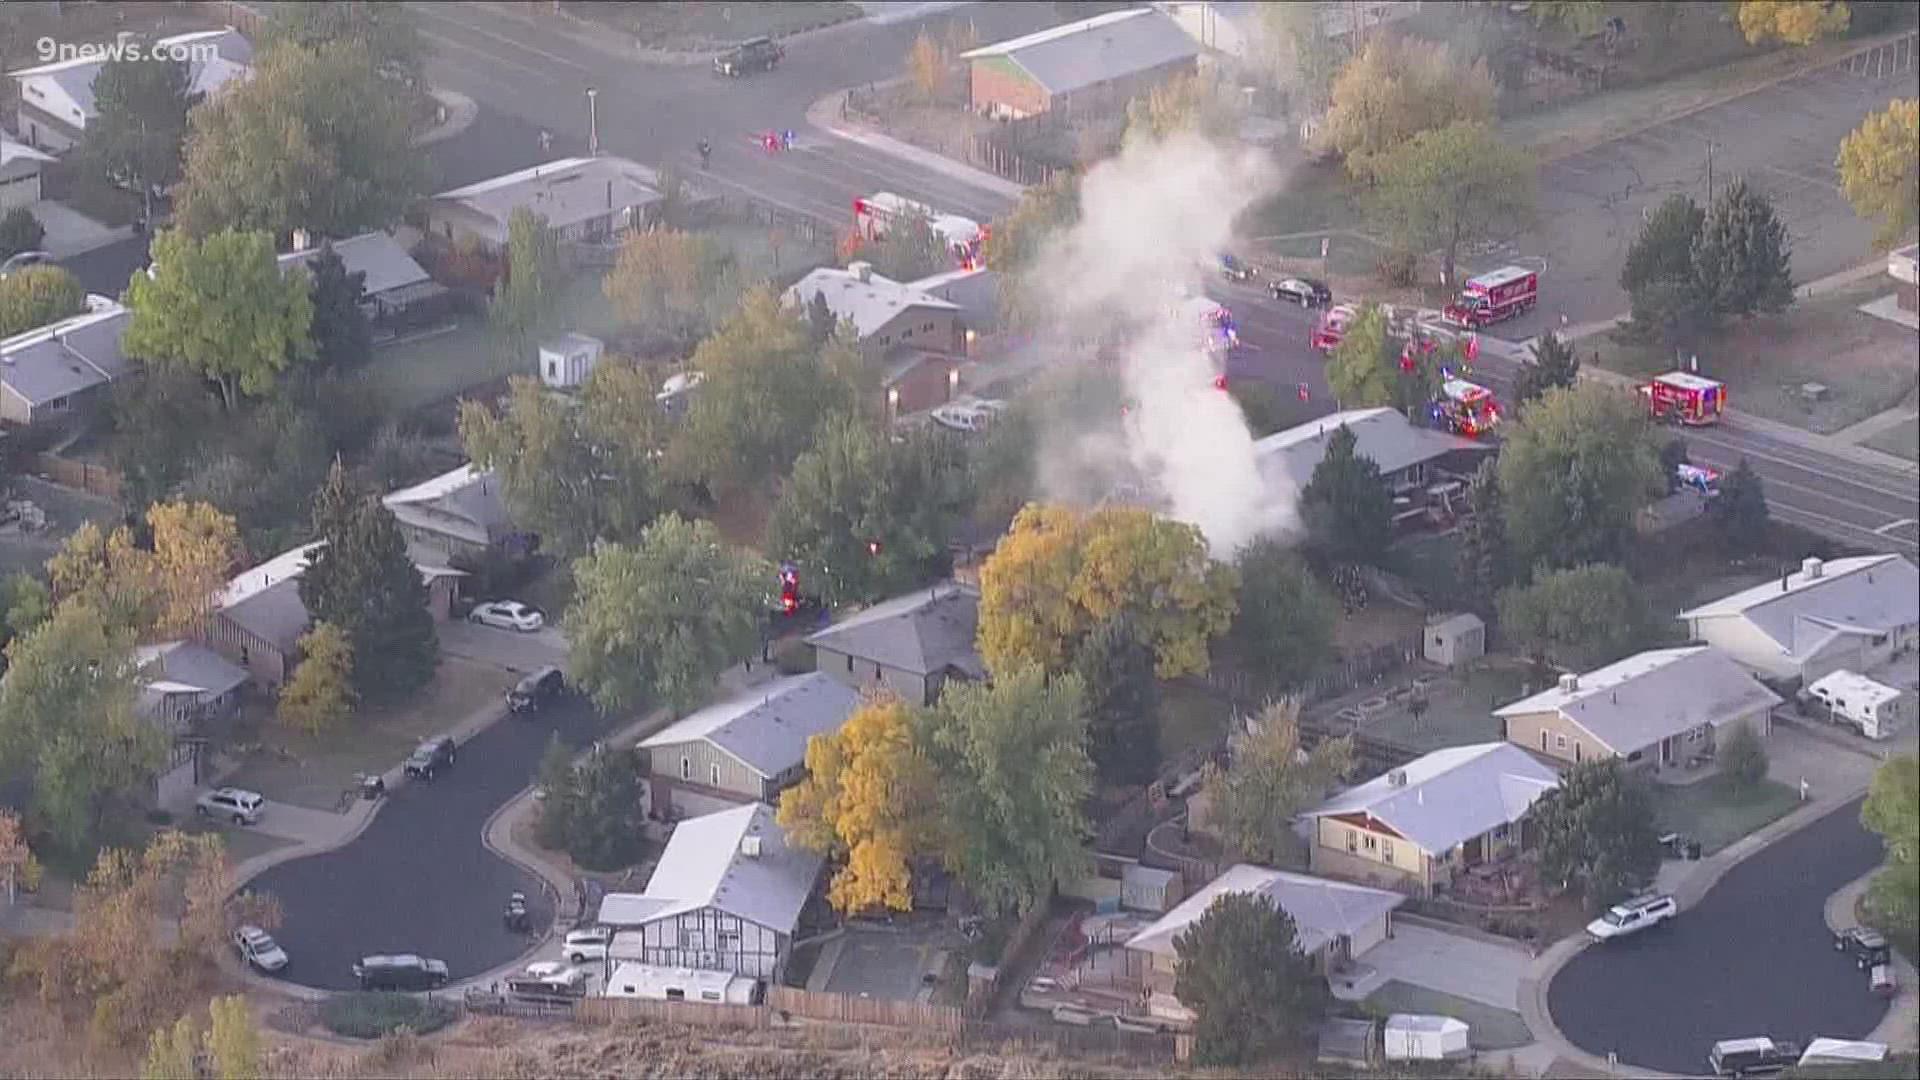 SKY9 was over the area showing flames and smoke coming from the house. One person was taken to the hospital to be treated for injuries sustained in the fire.